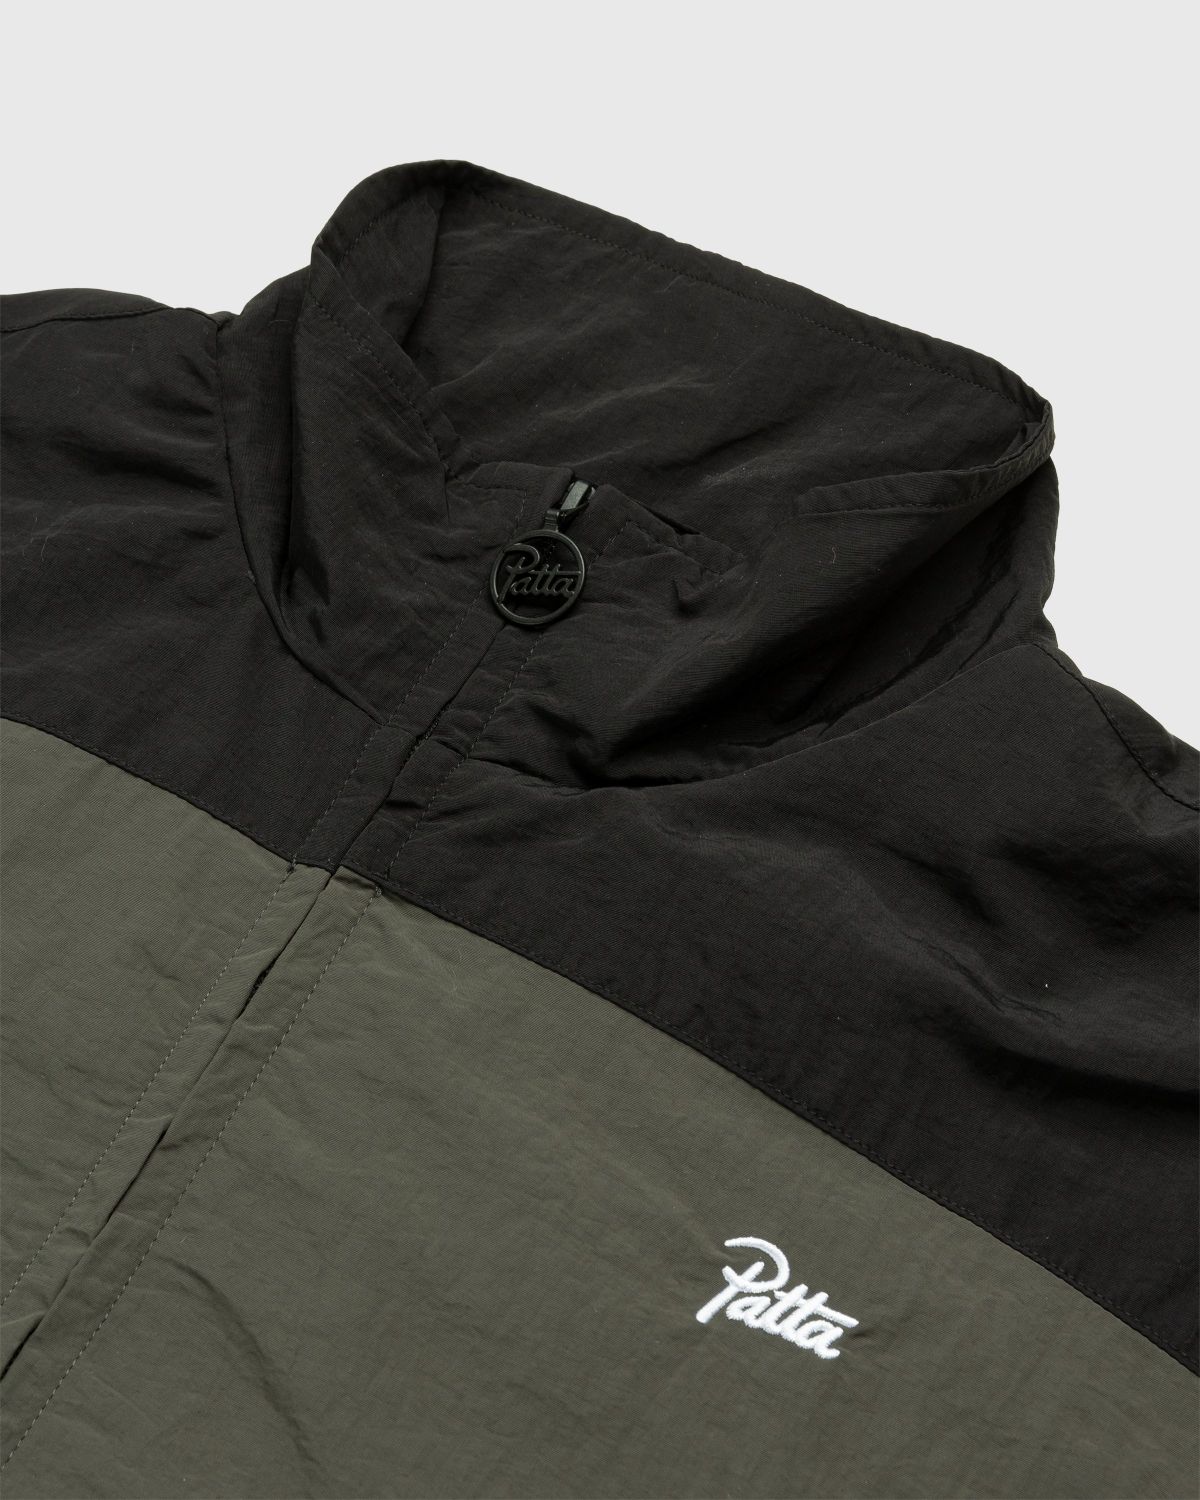 Patta – Athletic Track Jacket Black/Charcoal Grey - Outerwear - Black - Image 4